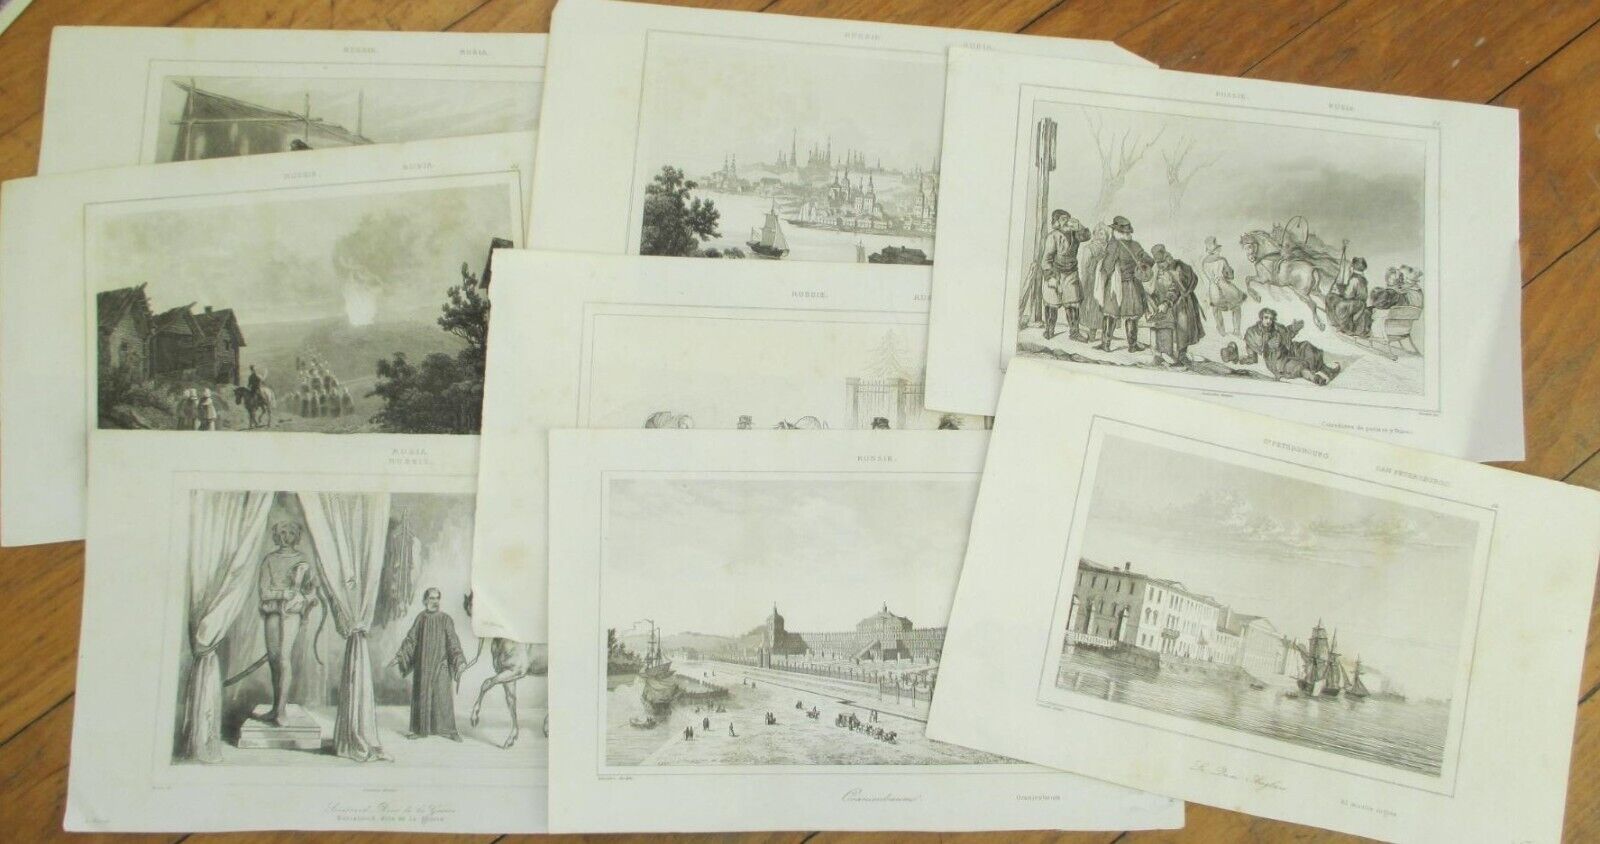 Russia 1850s Engraved Steel Print Group of Eight, Augustin François Lemaître